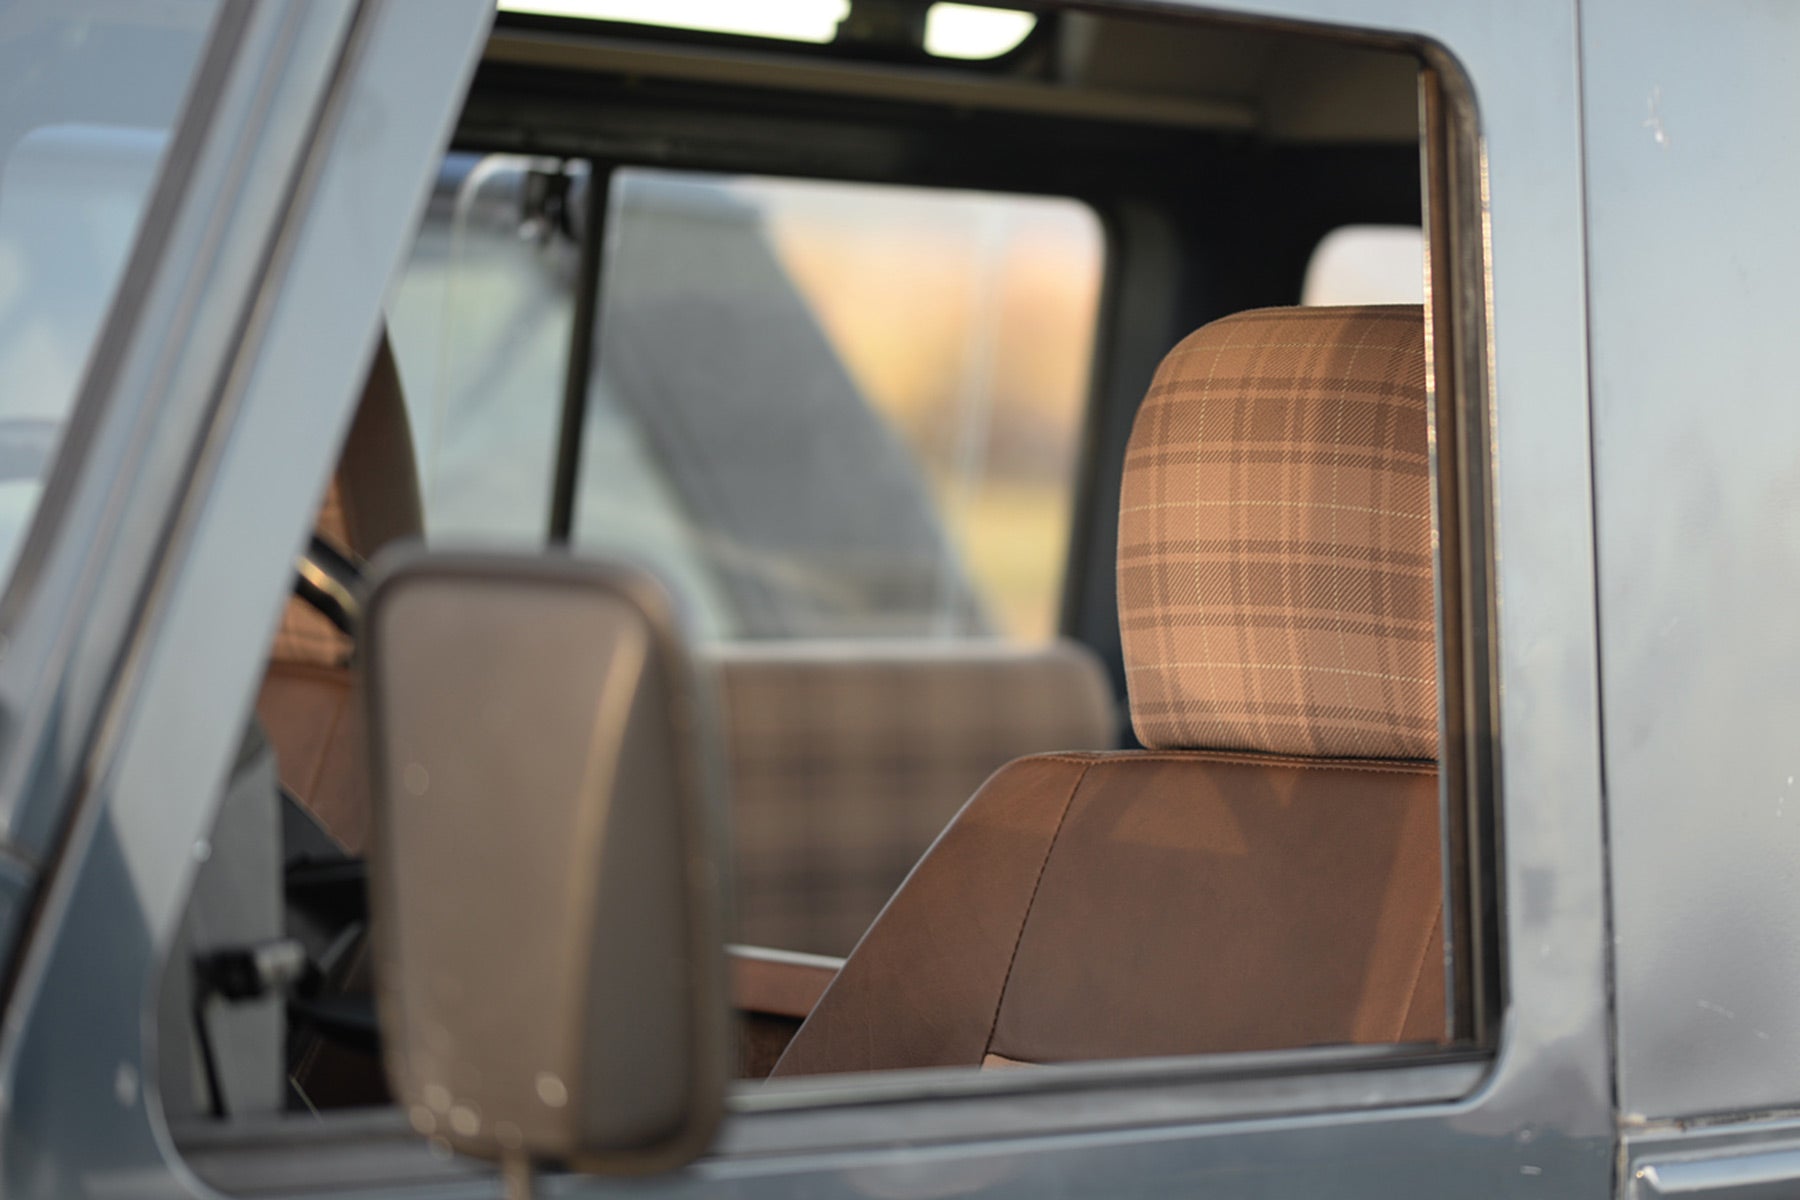 Relicate Leather Land Rover Defender interior with plaid cloth inserts